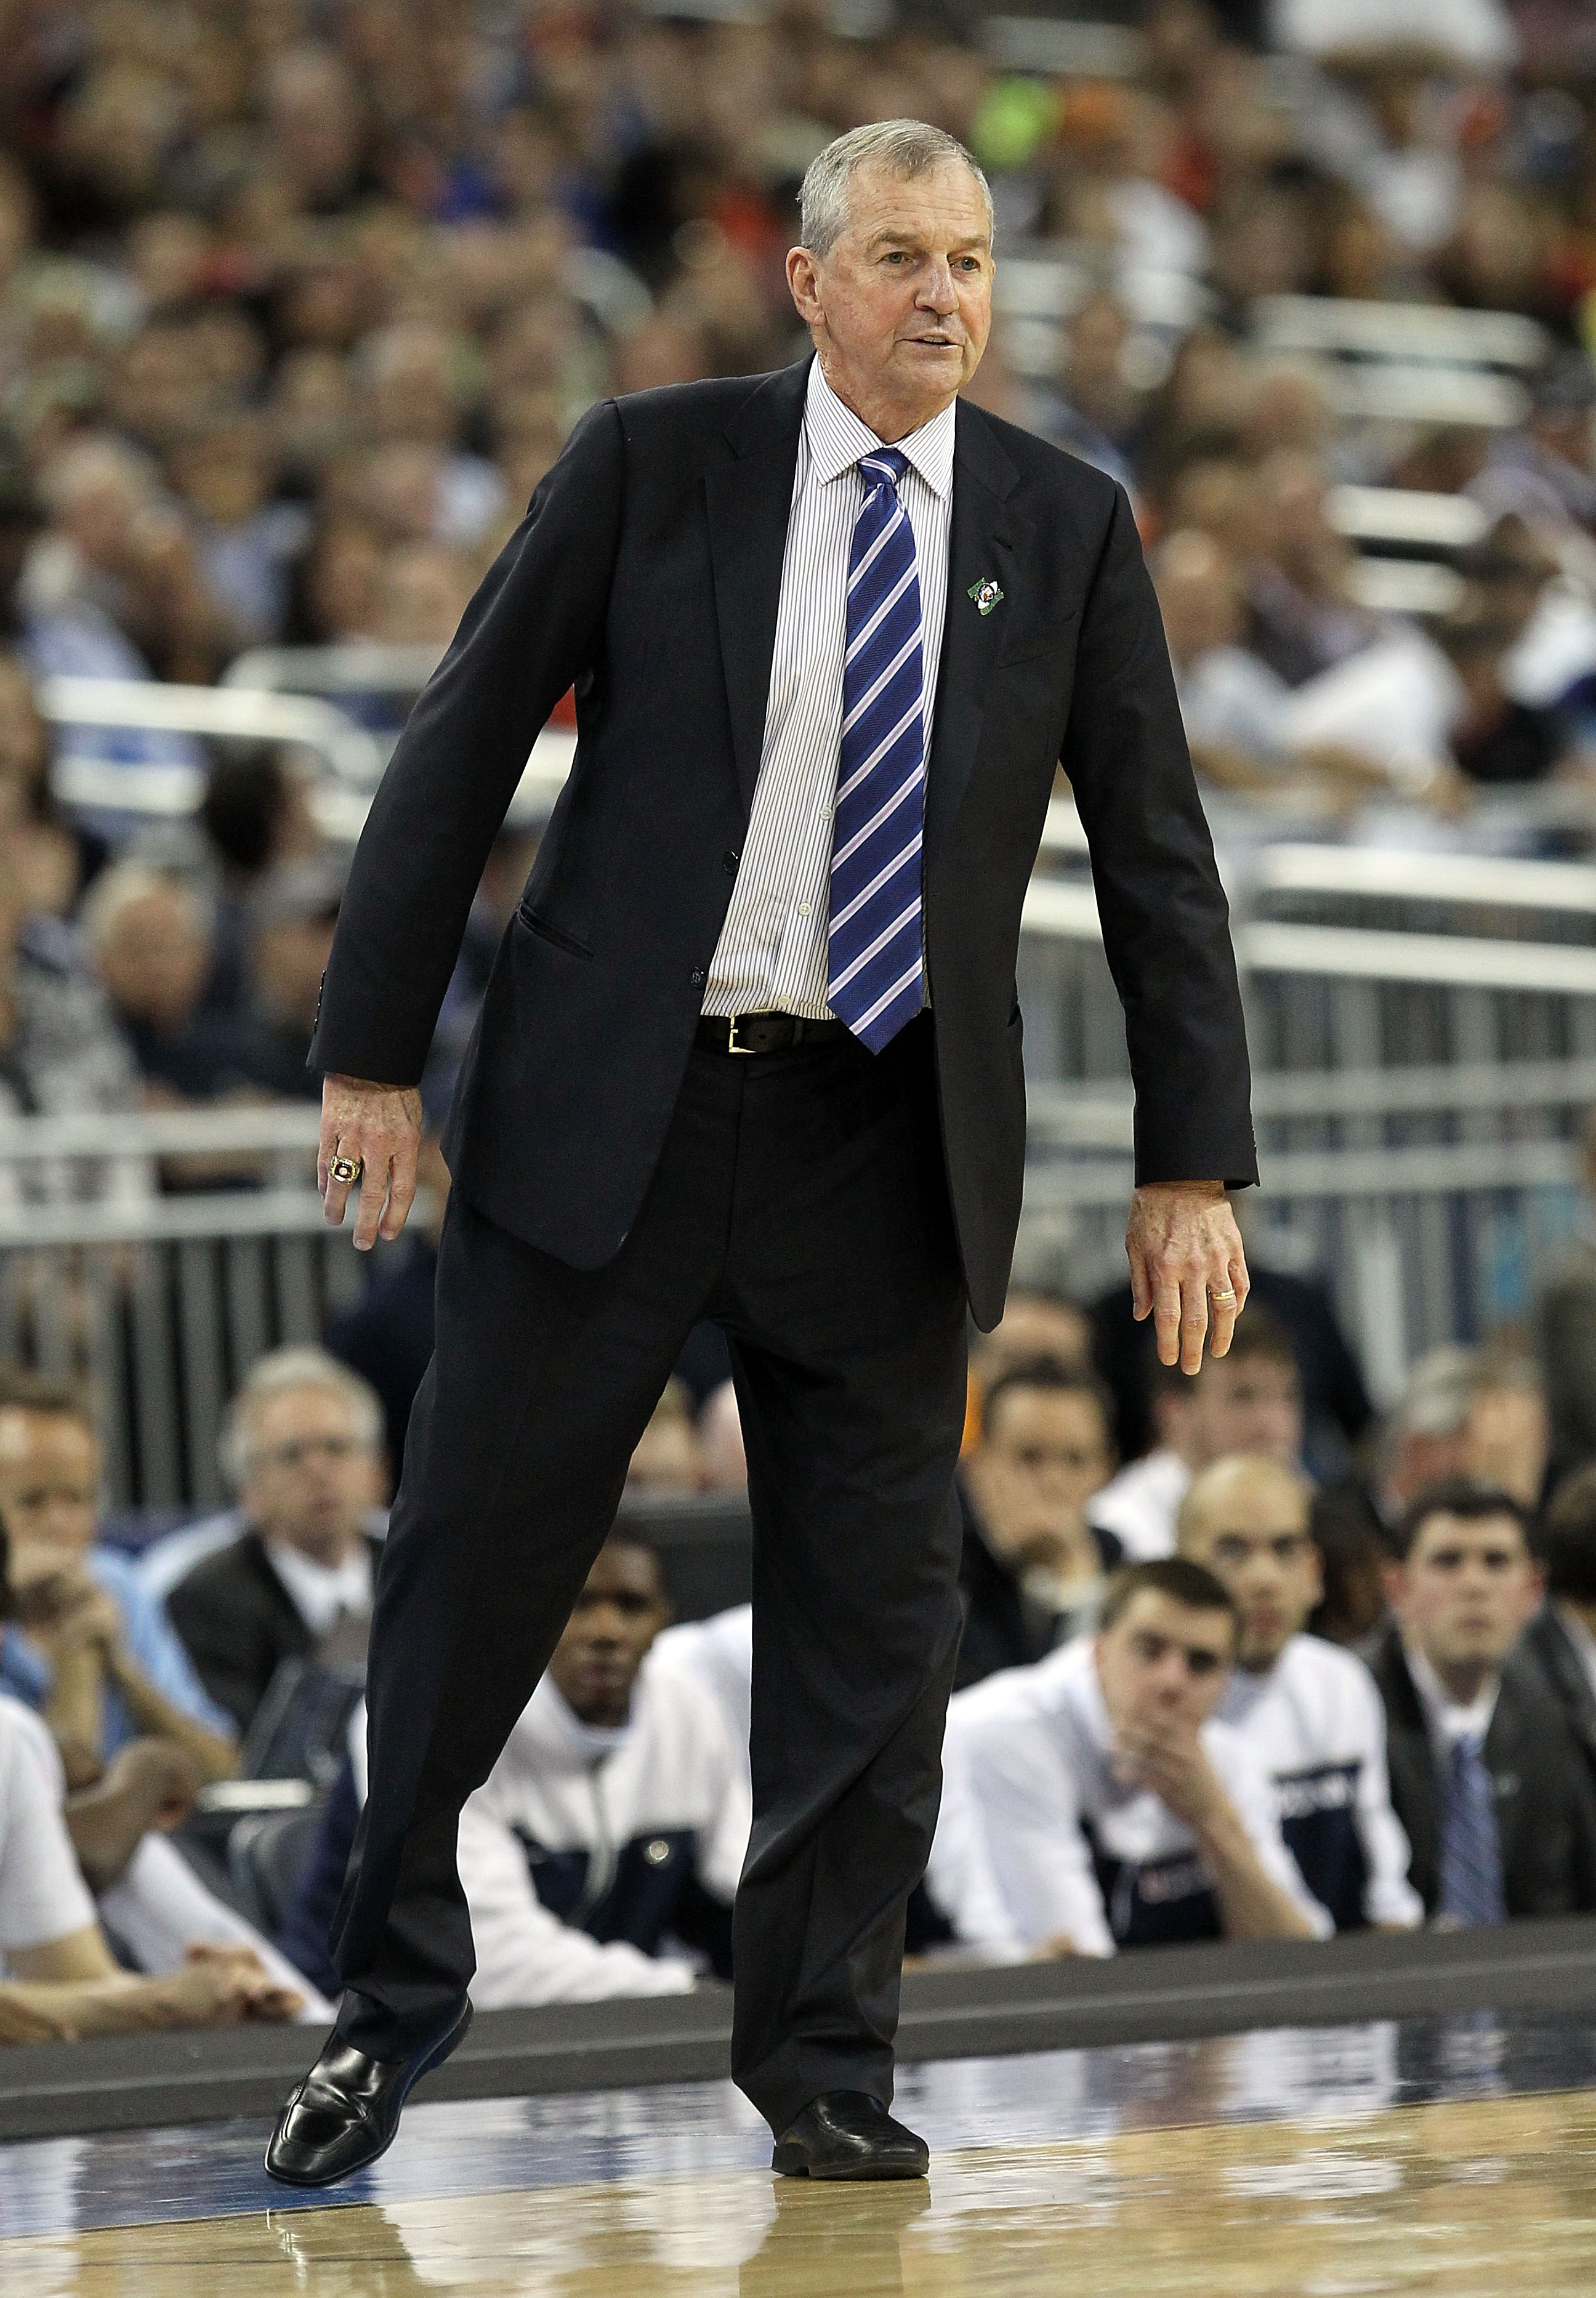 HOUSTON, TX - APRIL 04:  Head coach Jim Calhoun of the Connecticut Huskies gestures from the sidelines against the Butler Bulldogs during the National Championship Game of the 2011 NCAA Division I Men's Basketball Tournament at Reliant Stadium on April 4,